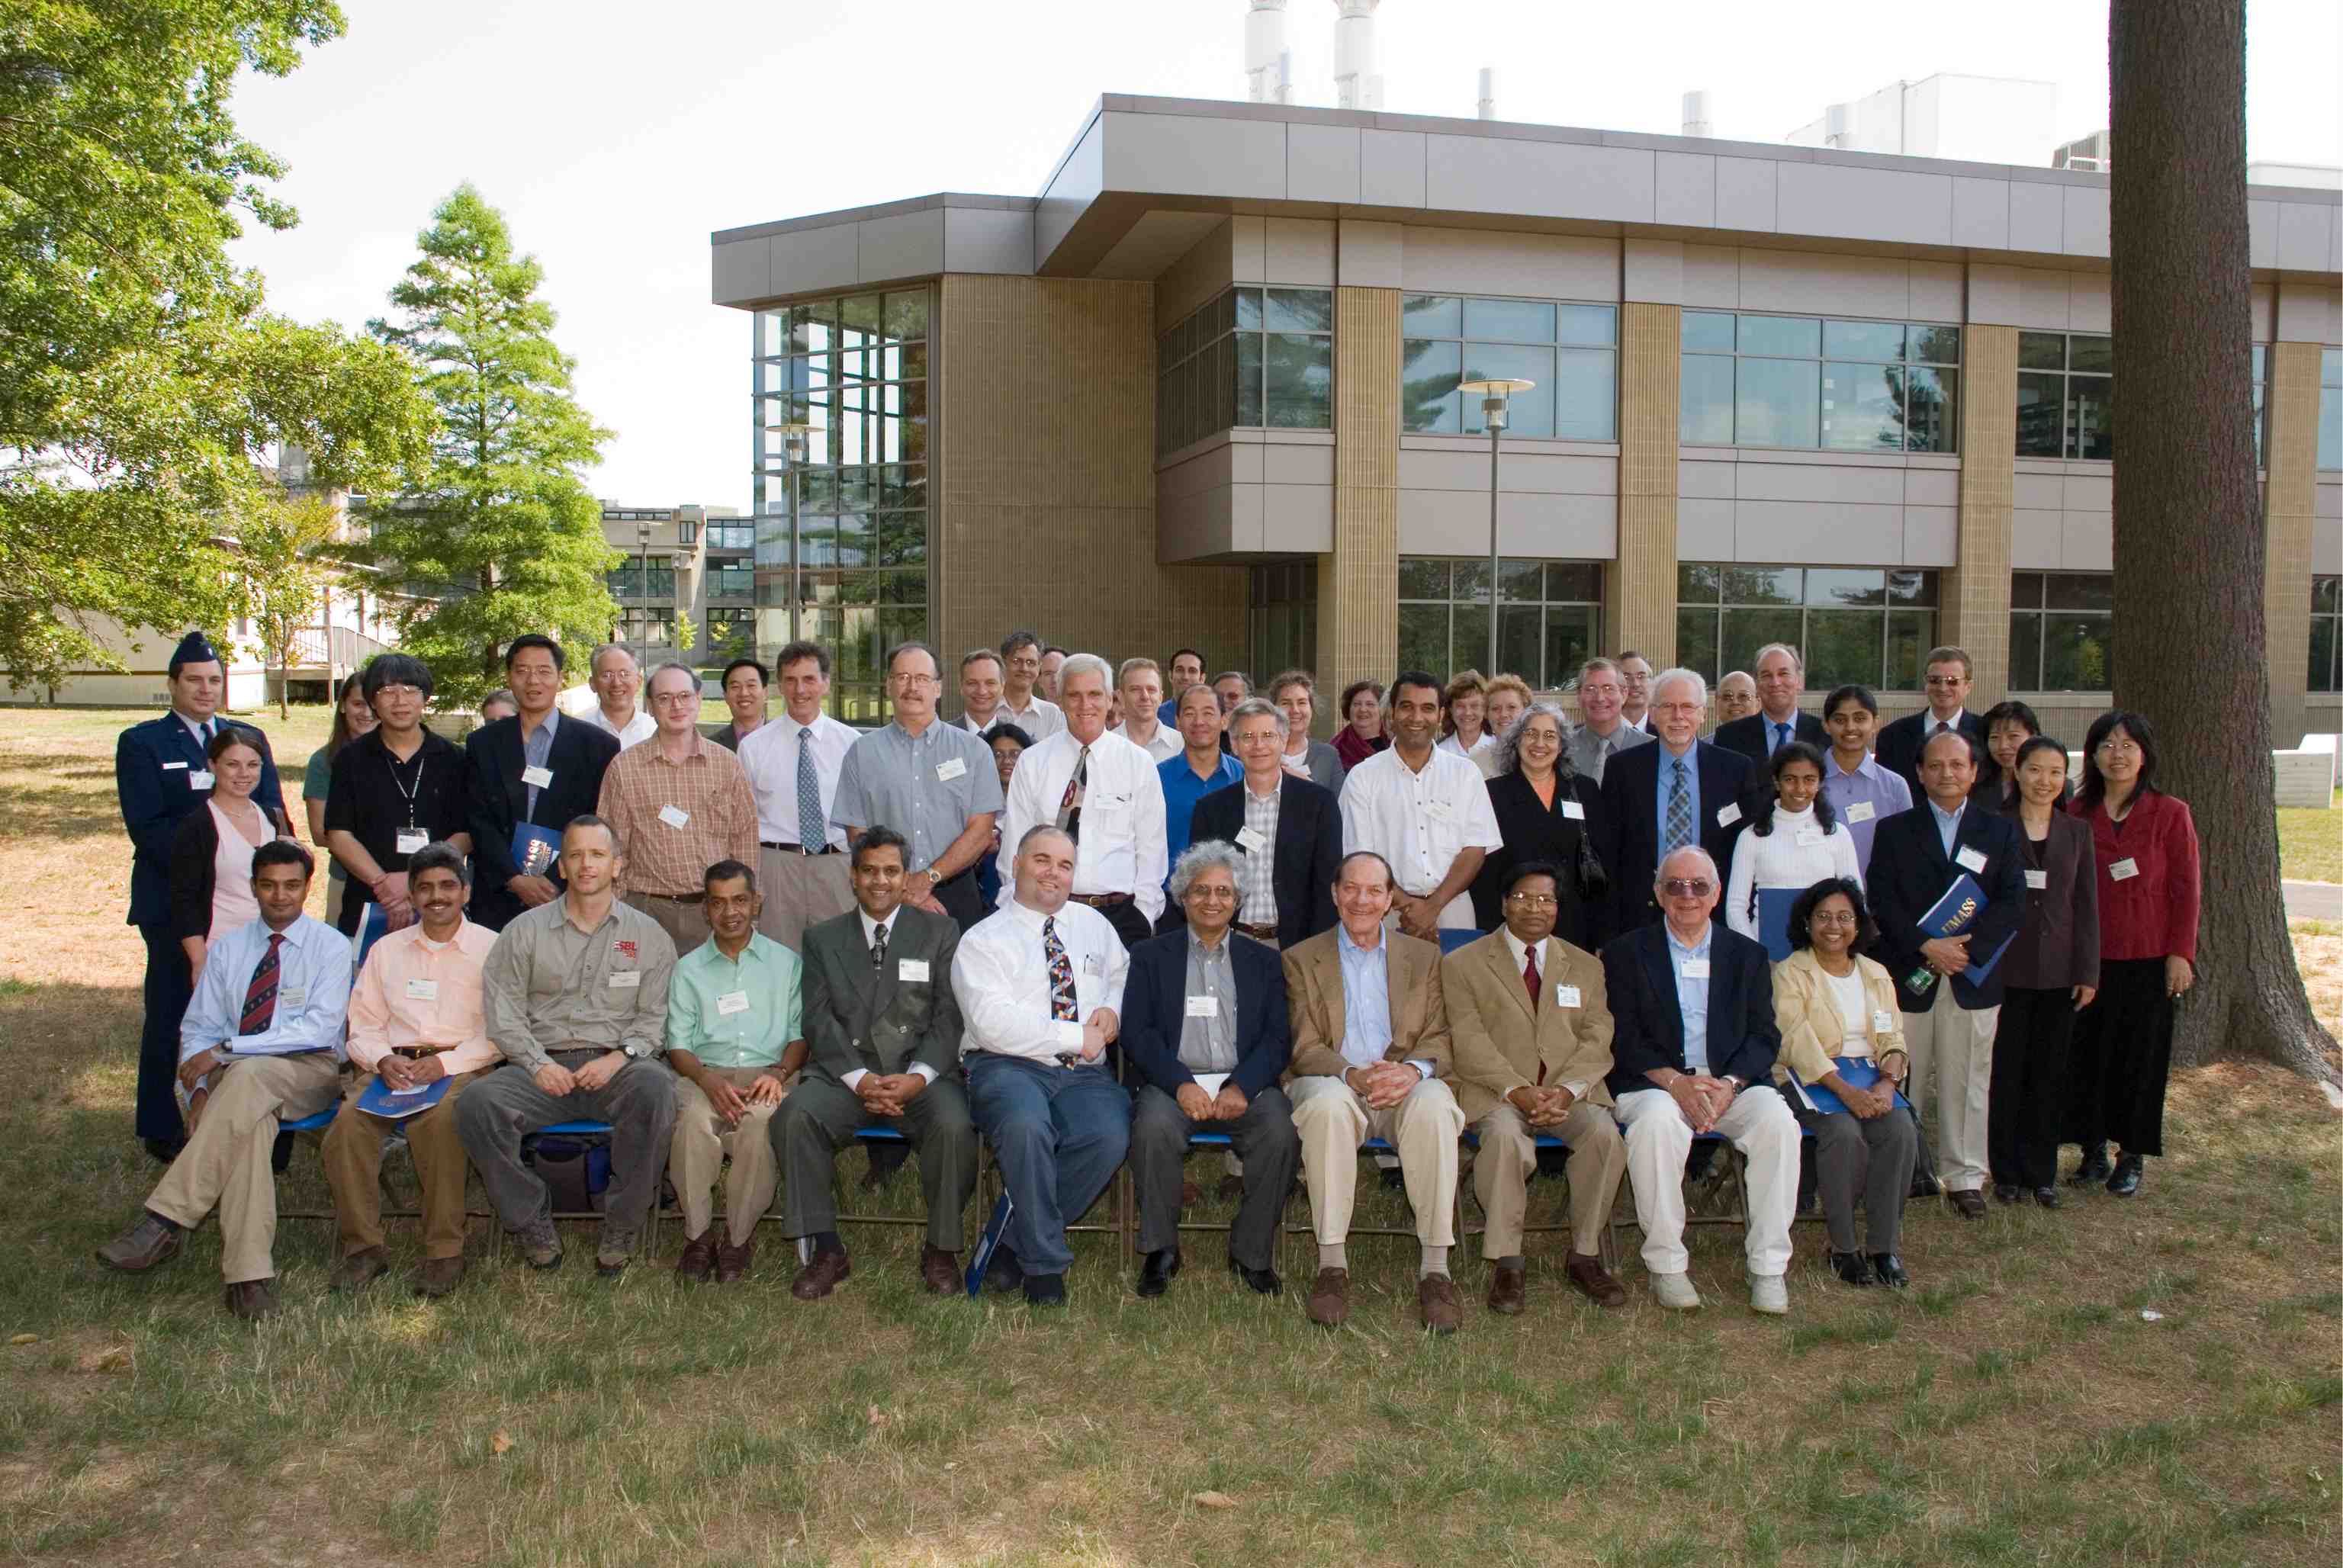 In this 2007 Botulinum Research Center symposium group photo, Dr. Bal Ram Singh is seated fifth from the right.